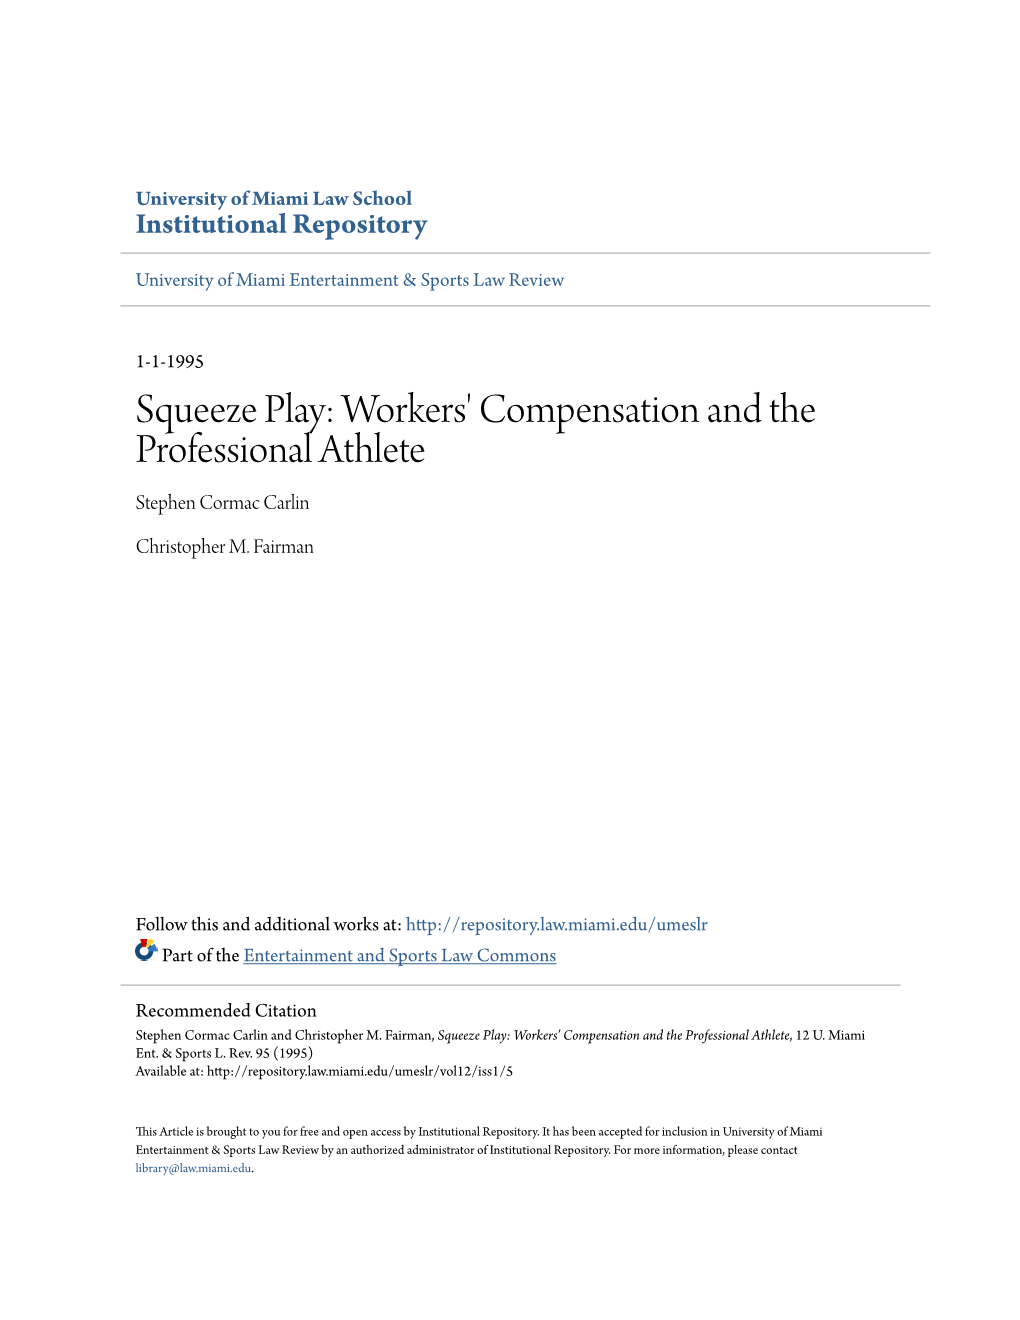 Workers' Compensation and the Professional Athlete Stephen Cormac Carlin